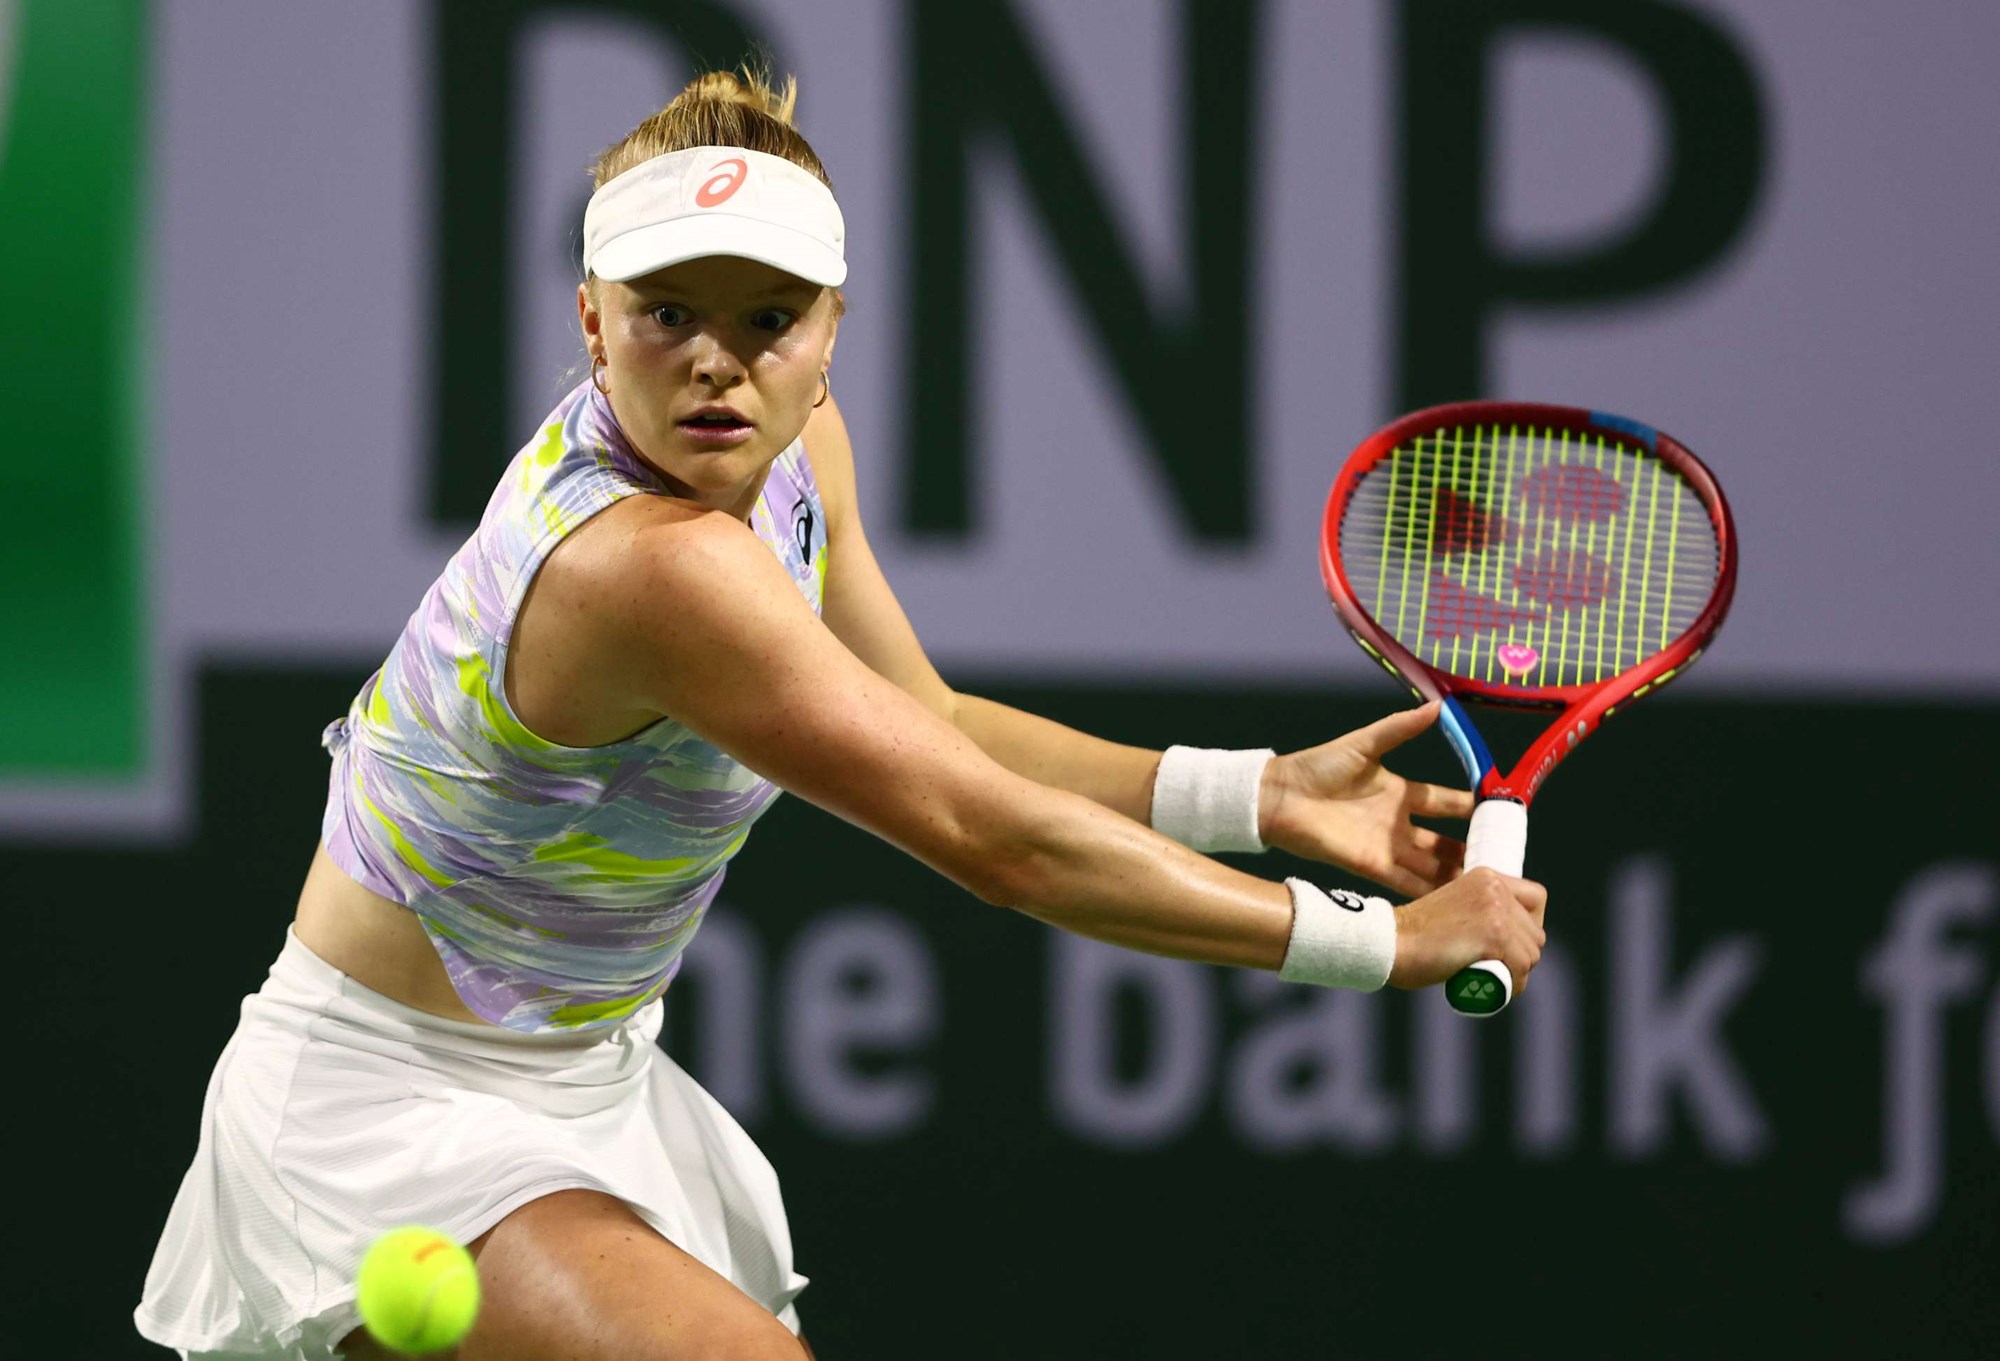 Harriet Dart lines up a backhand in the opening round of Indian Wells 2022